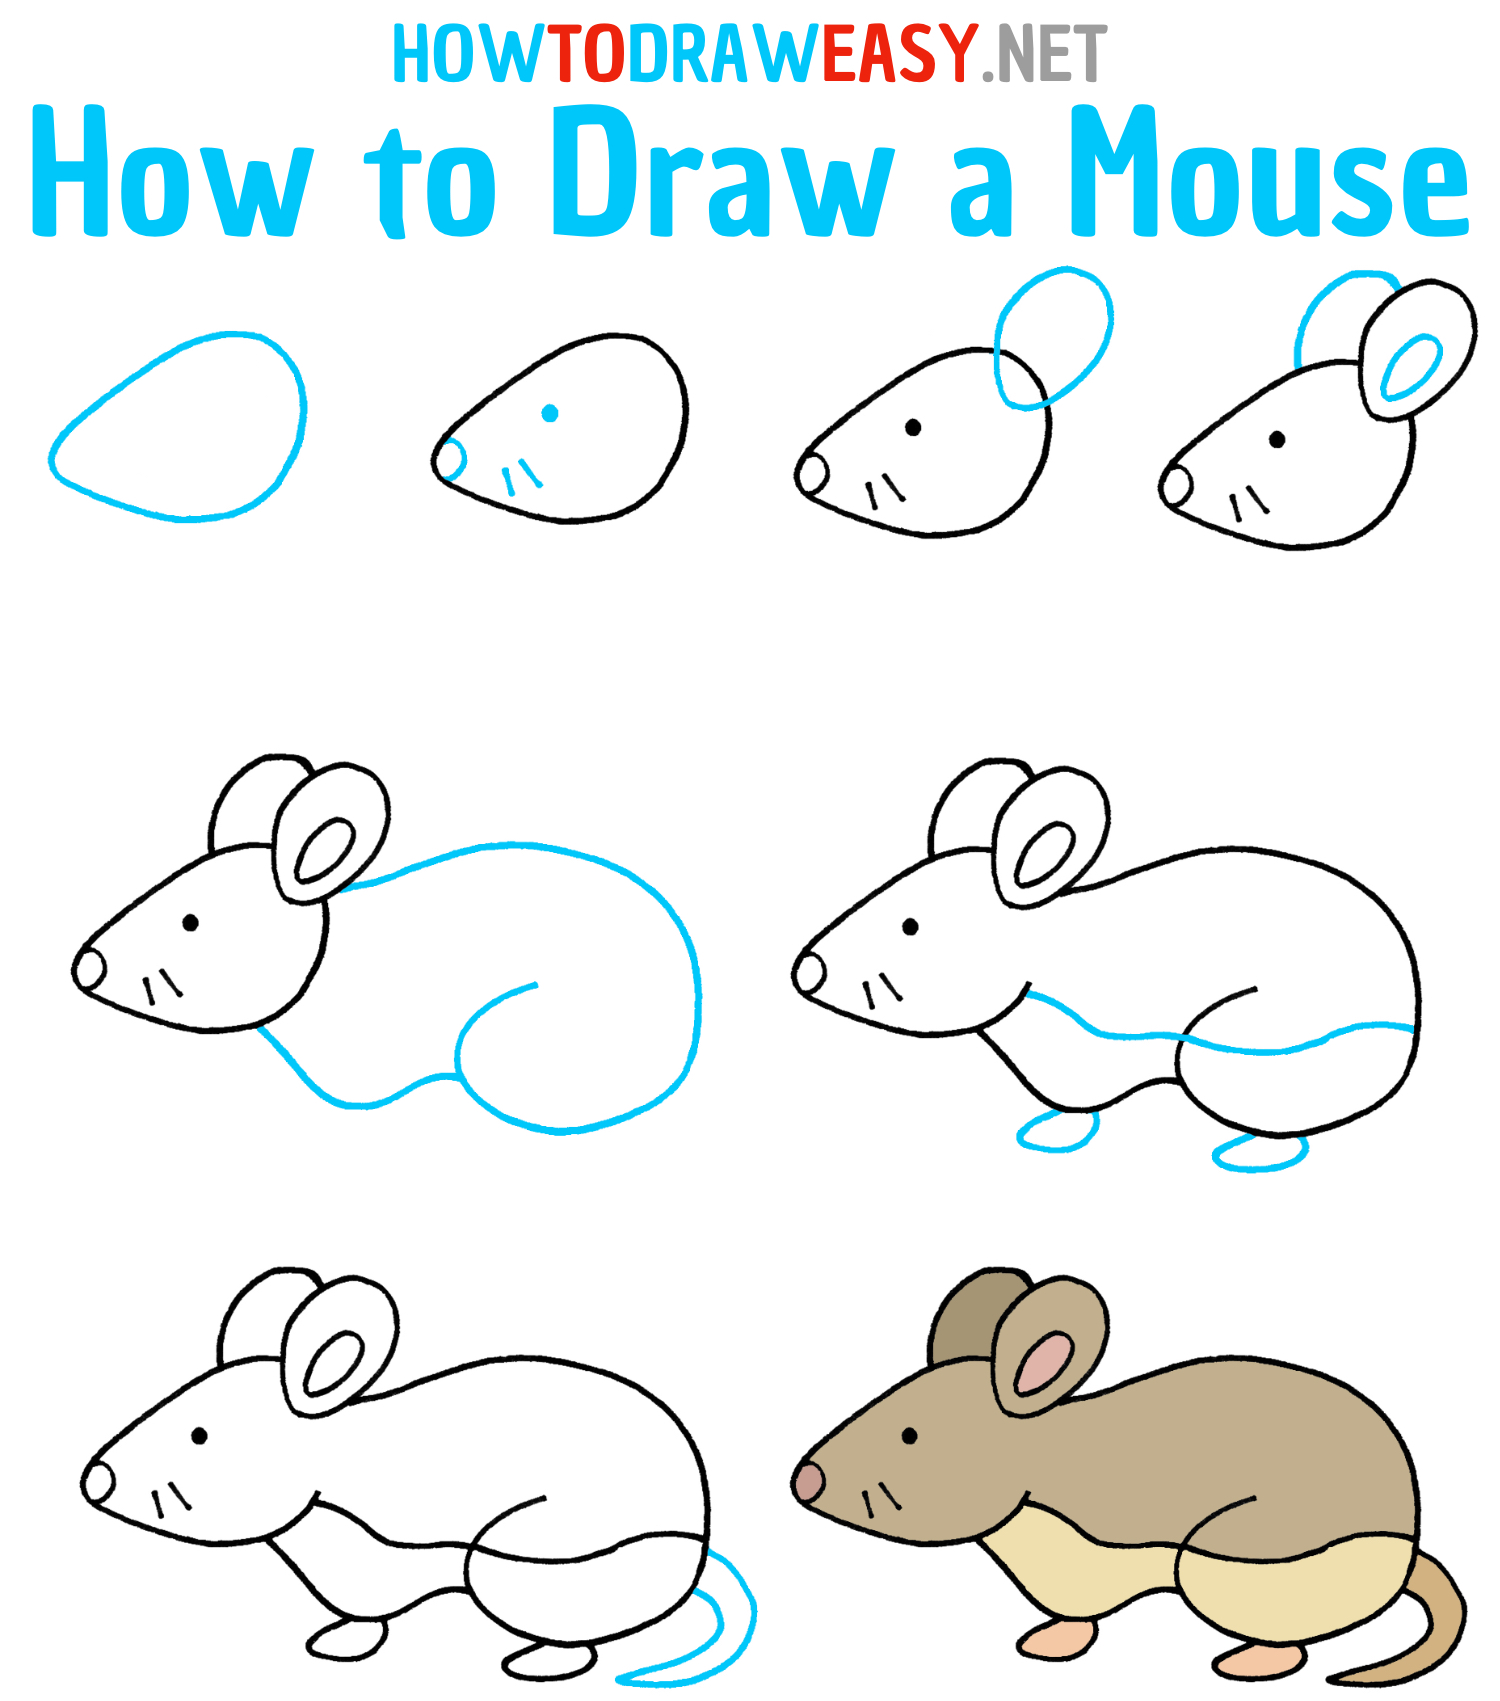 Drawn Mouse Realistic Stock Illustrations – 299 Drawn Mouse Realistic Stock  Illustrations, Vectors & Clipart - Dreamstime